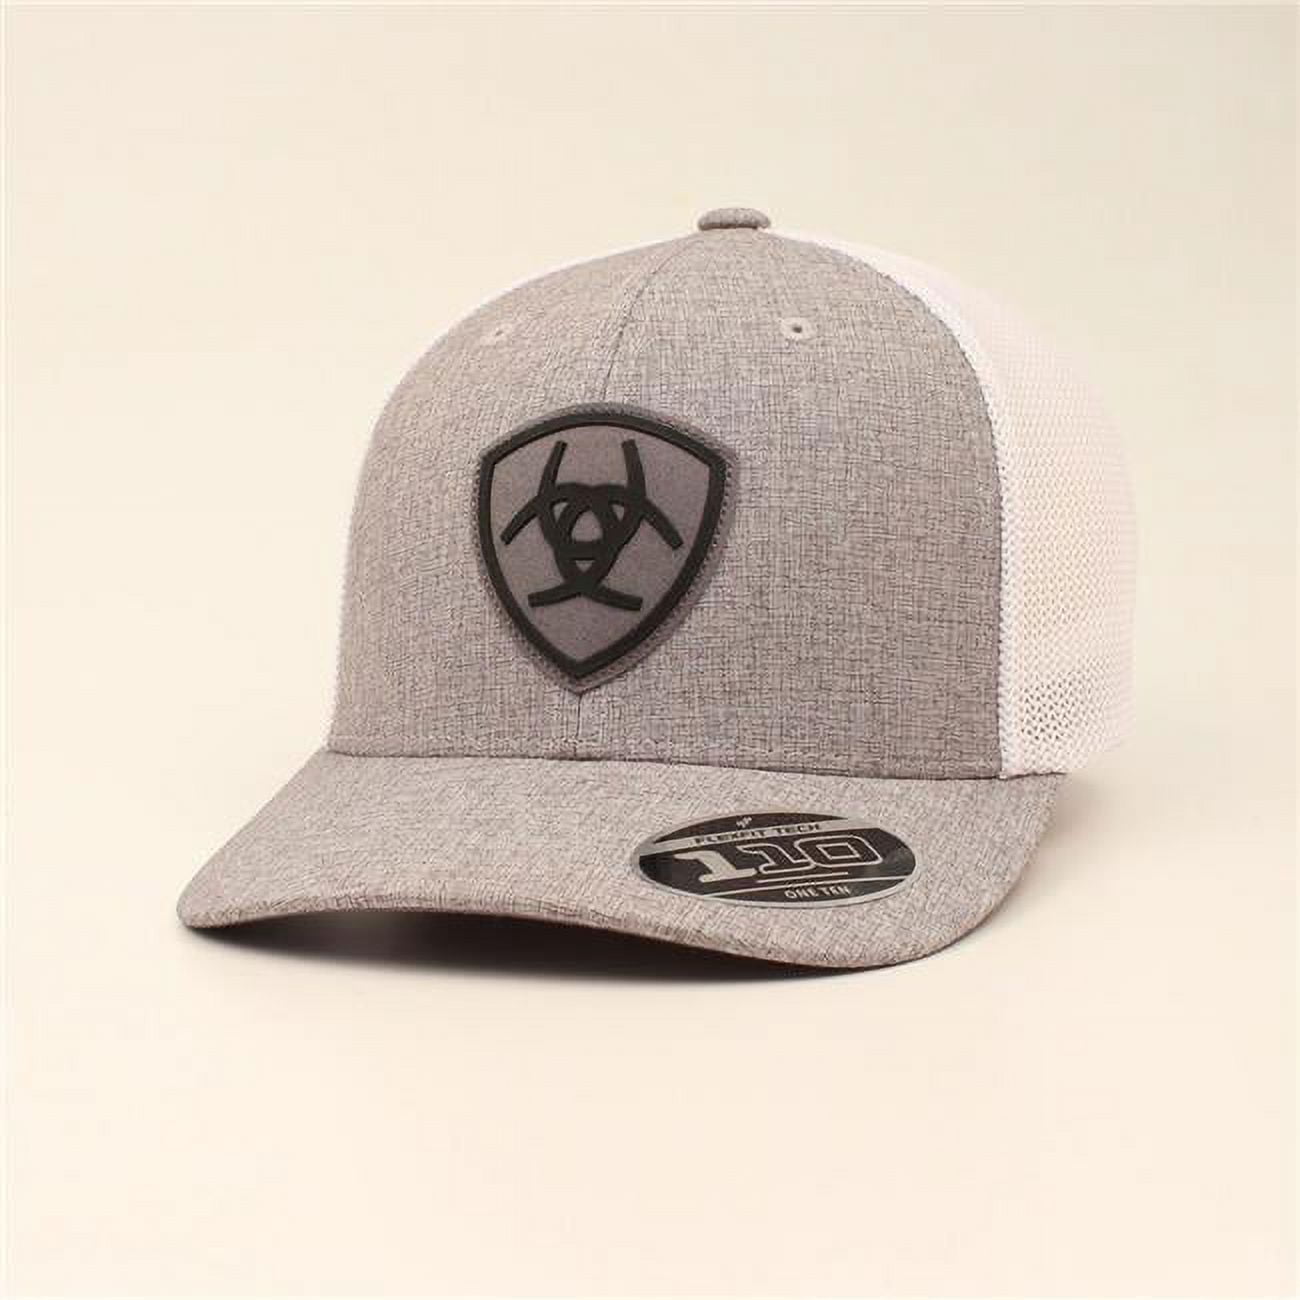 Caps Mesh Patch, Snap Back Grey Baseball with M&F A300008406 Ariat Hats Western Men